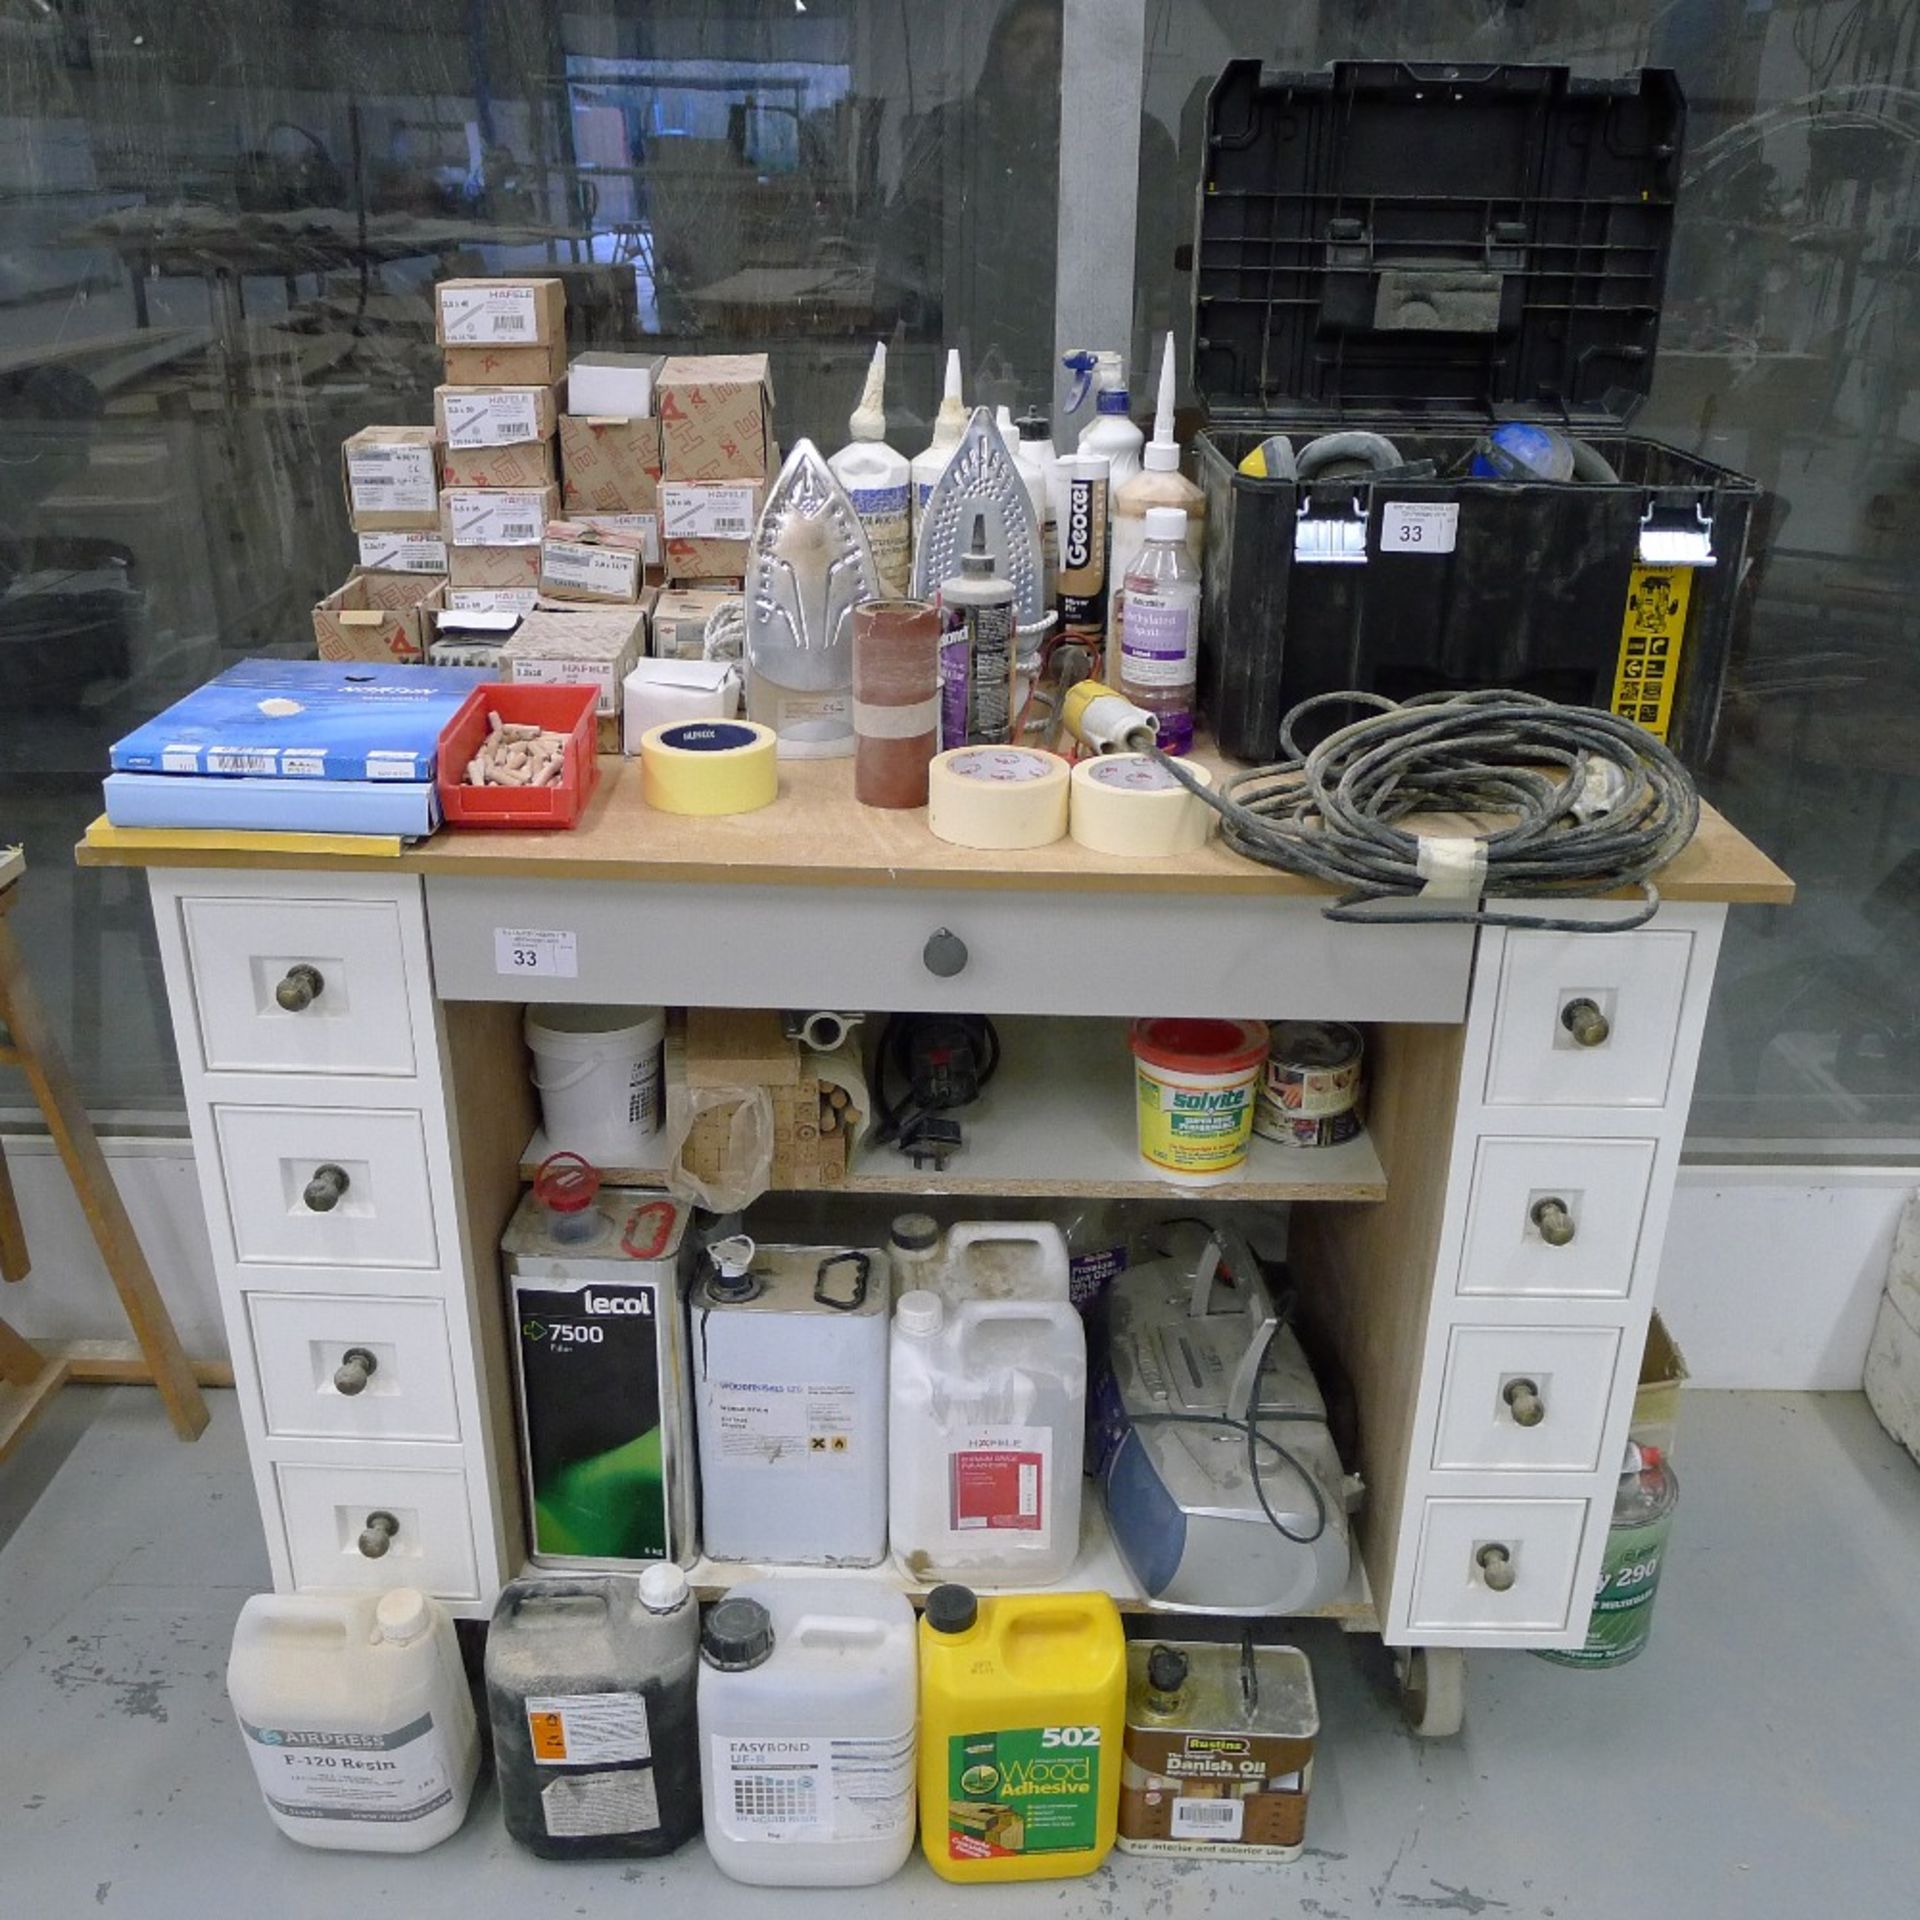 1 wheeled workshop cabinet / bench and a quantity of various items including screws, glues, 2 irons,